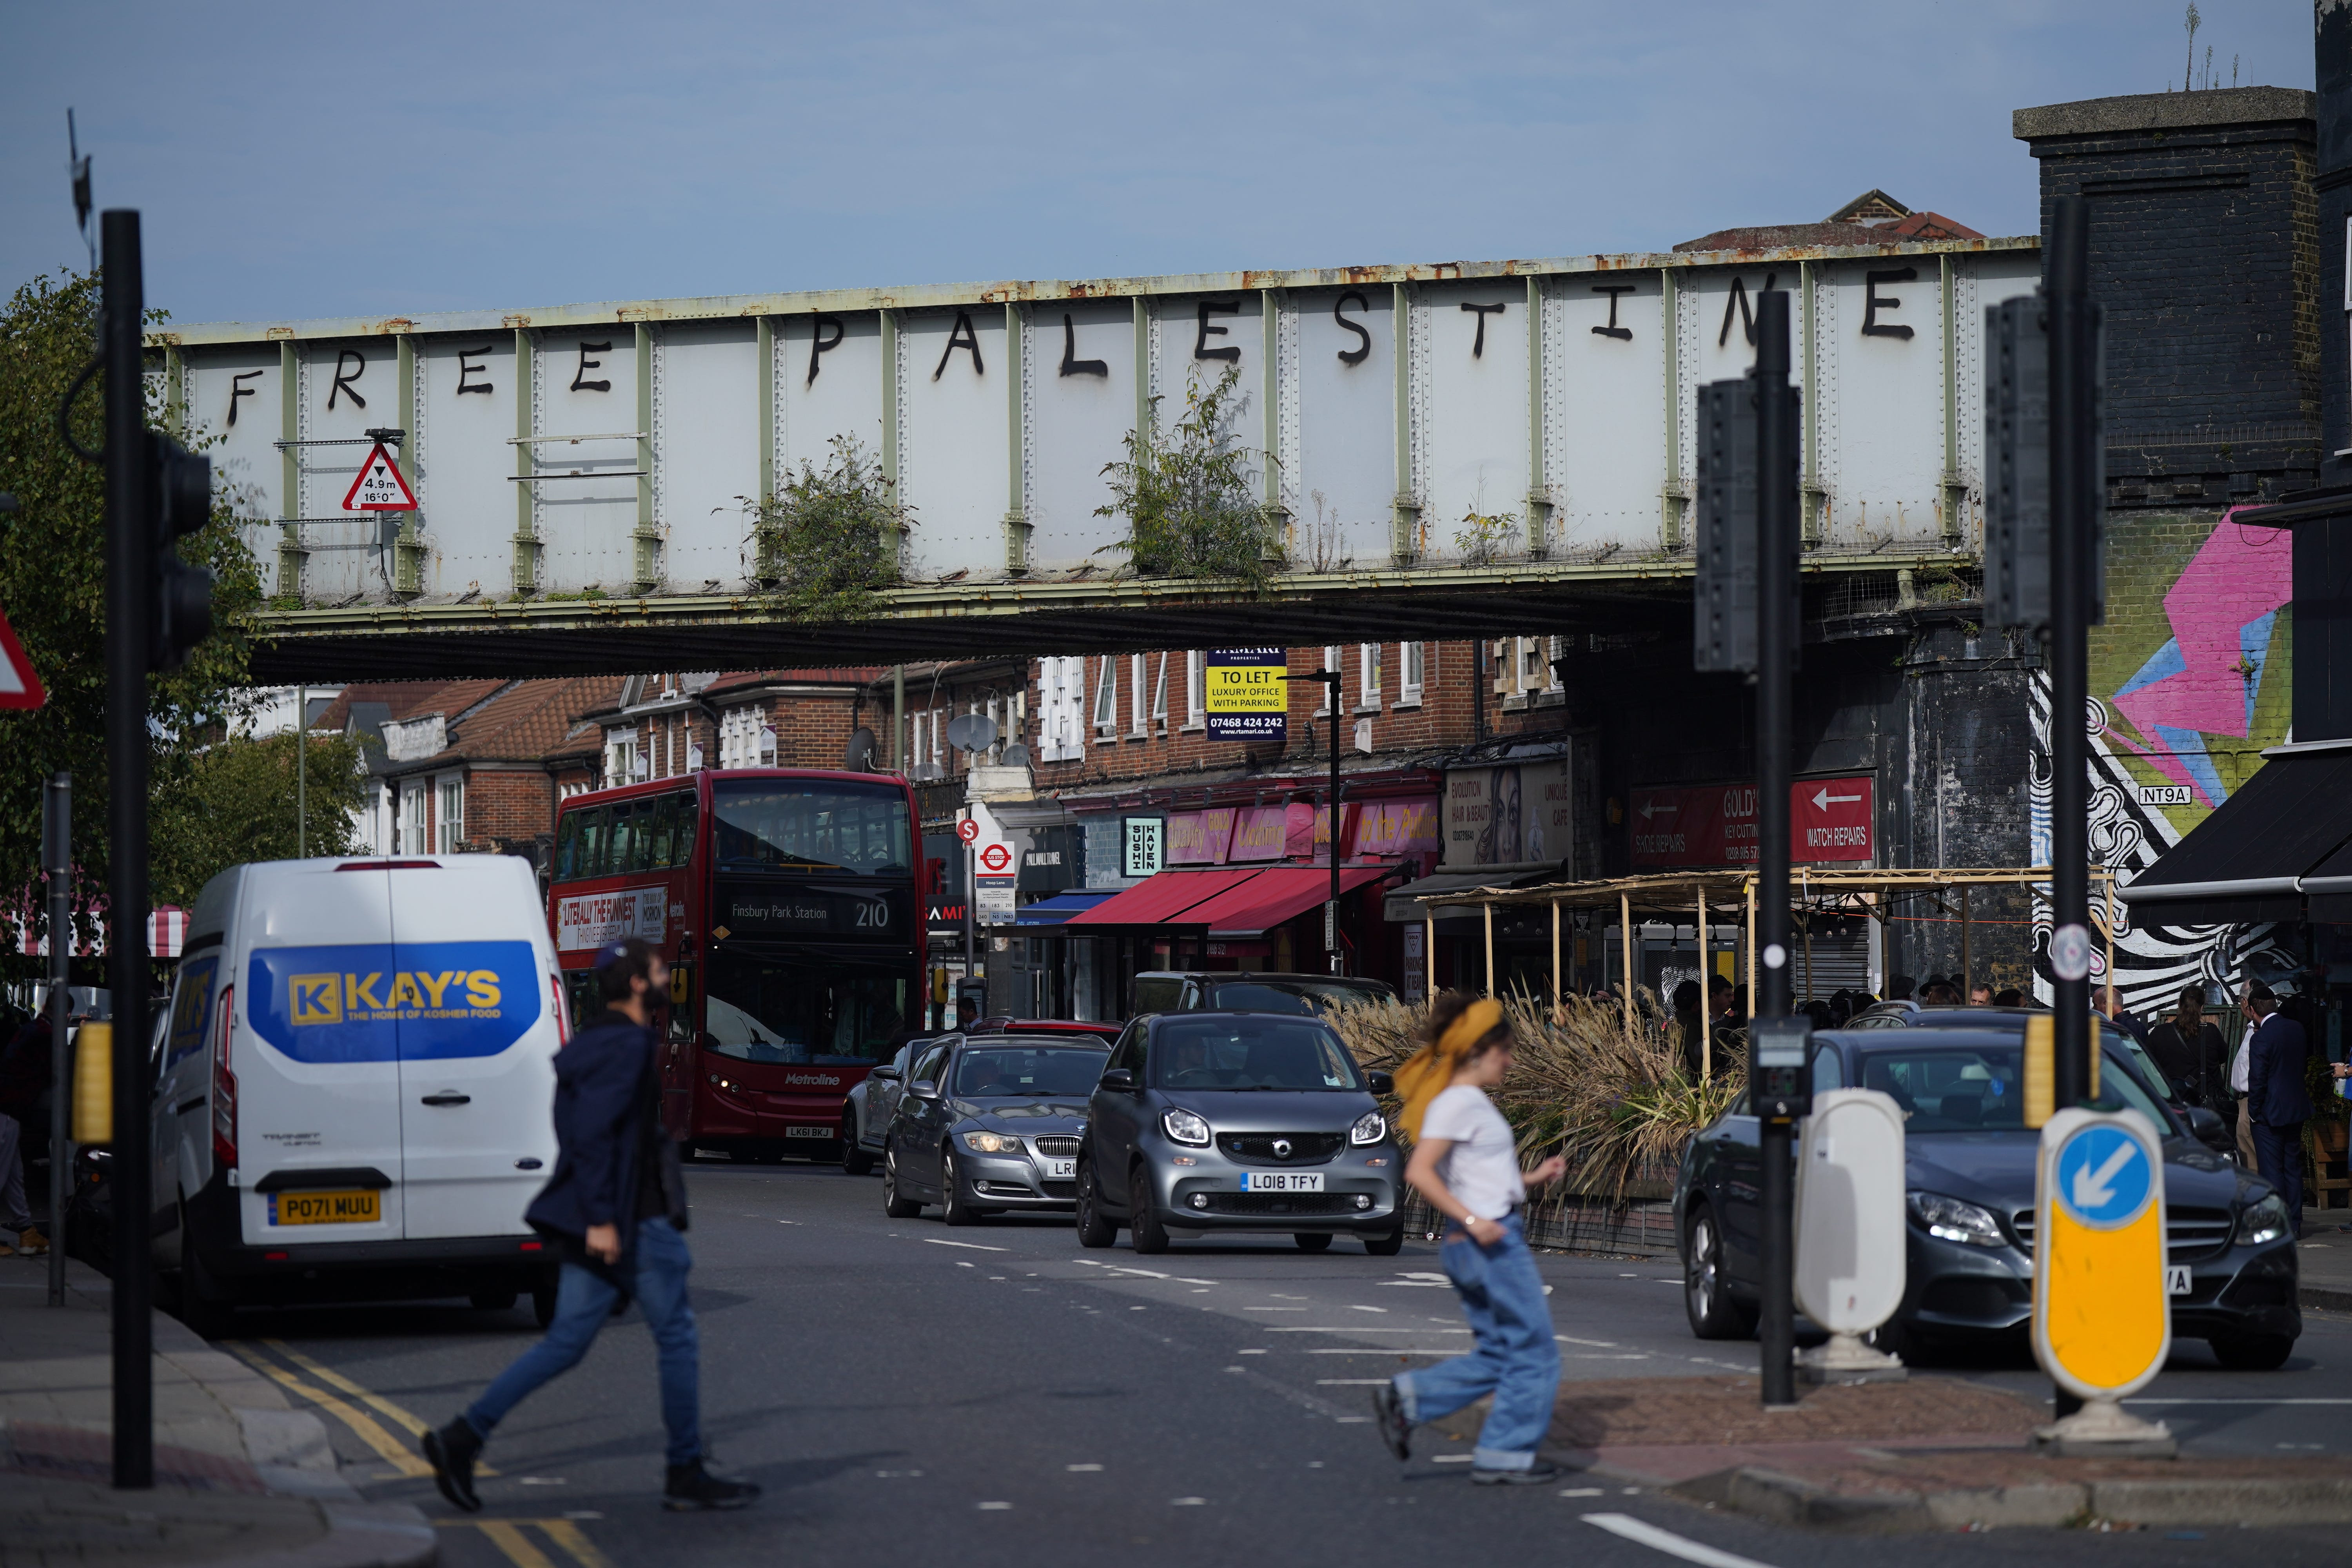 Pro Palestinian graffiti was sprayed on a railway bridge in Golders Green, north London, an area with a prominent Jewish population